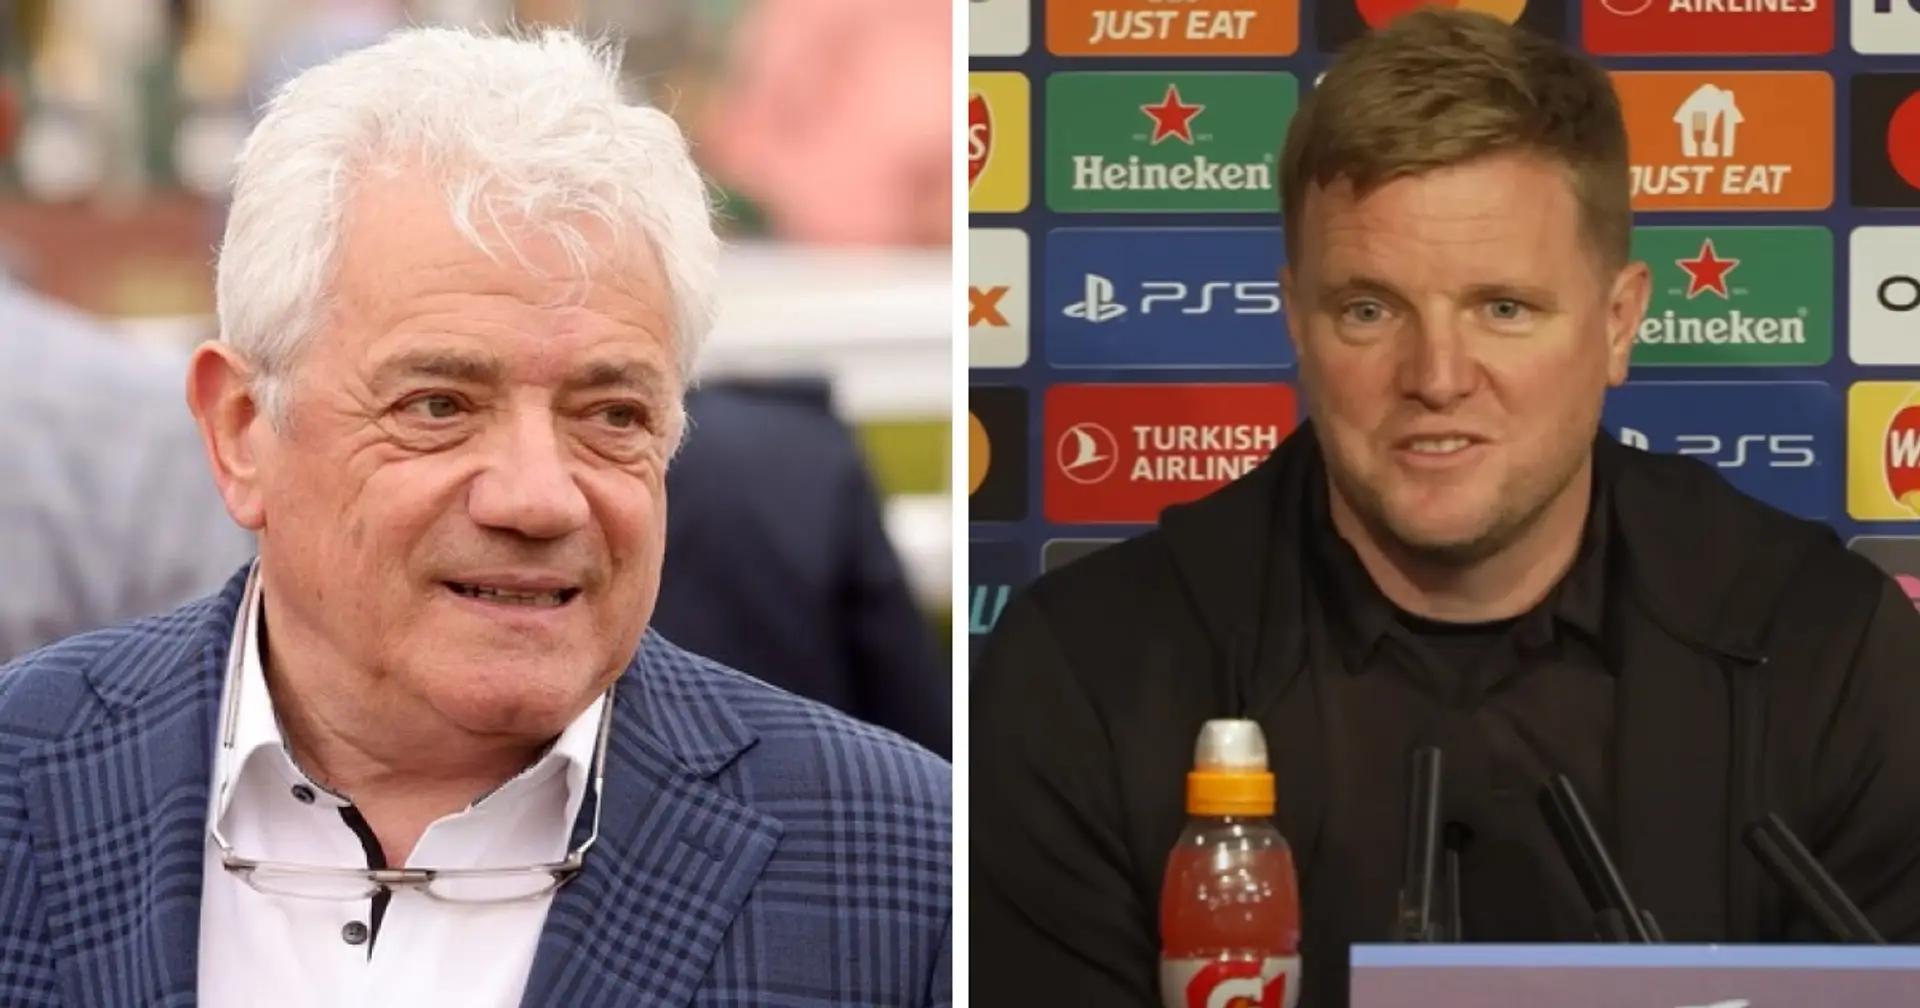 'You have to be a dreamer': Eddie Howe on Kevin Keegan's words after their meeting 